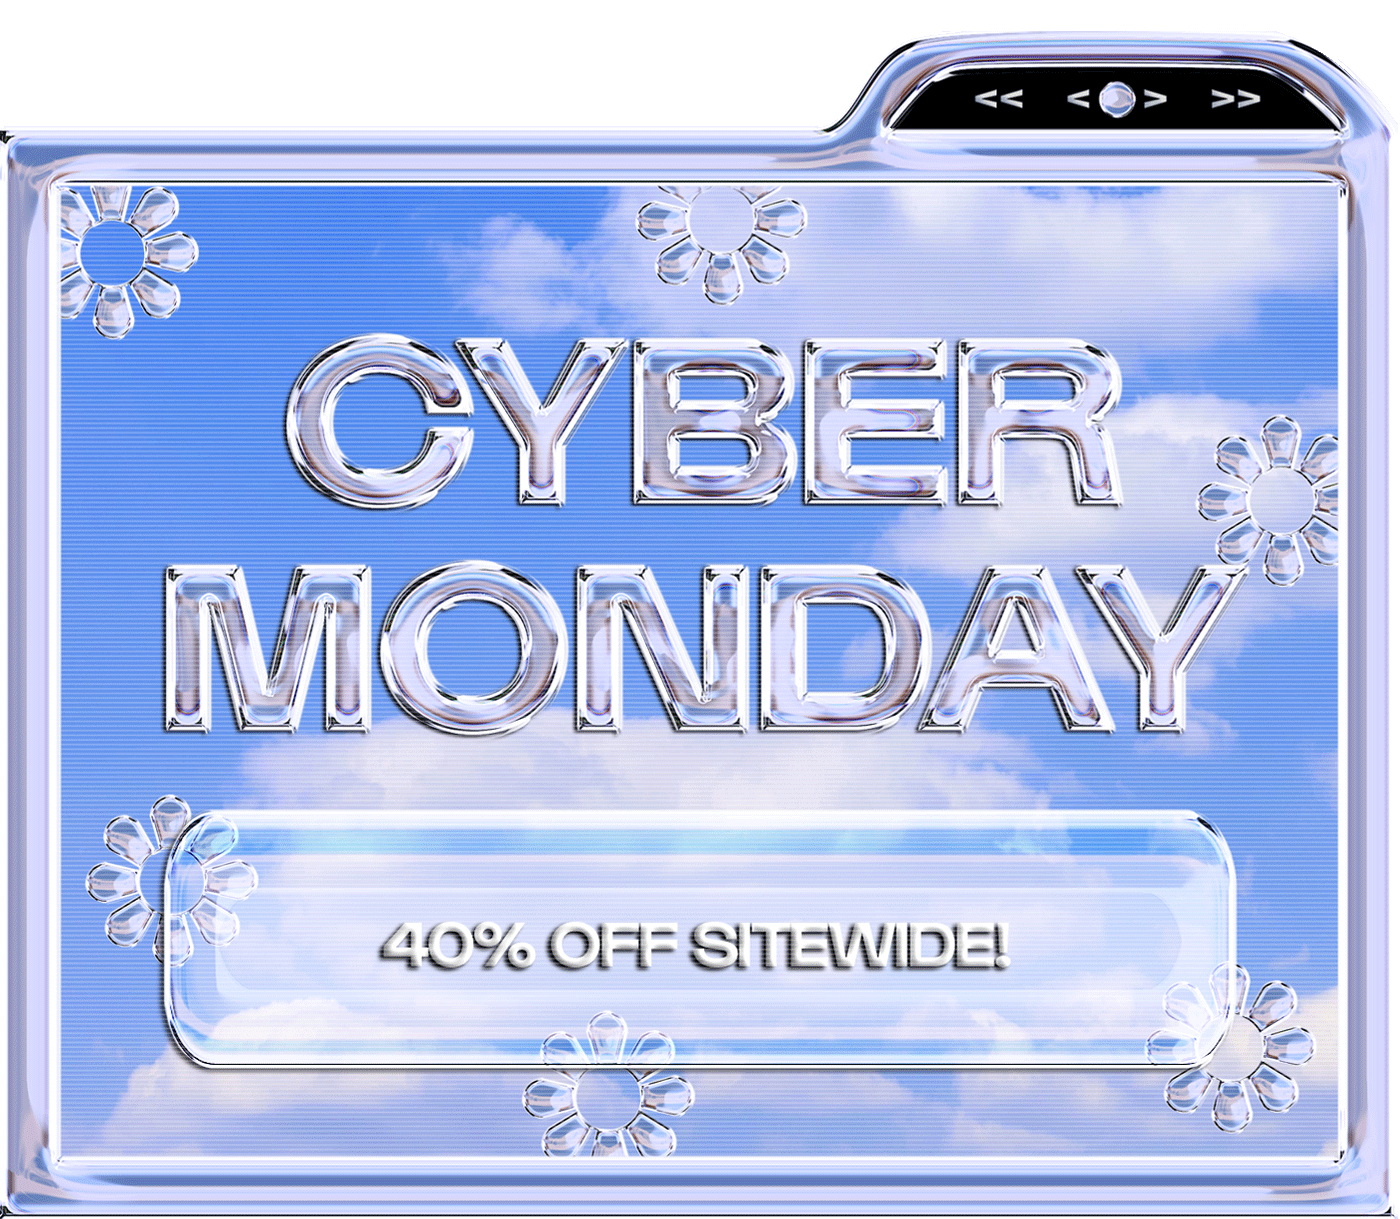 cyber monday is here!